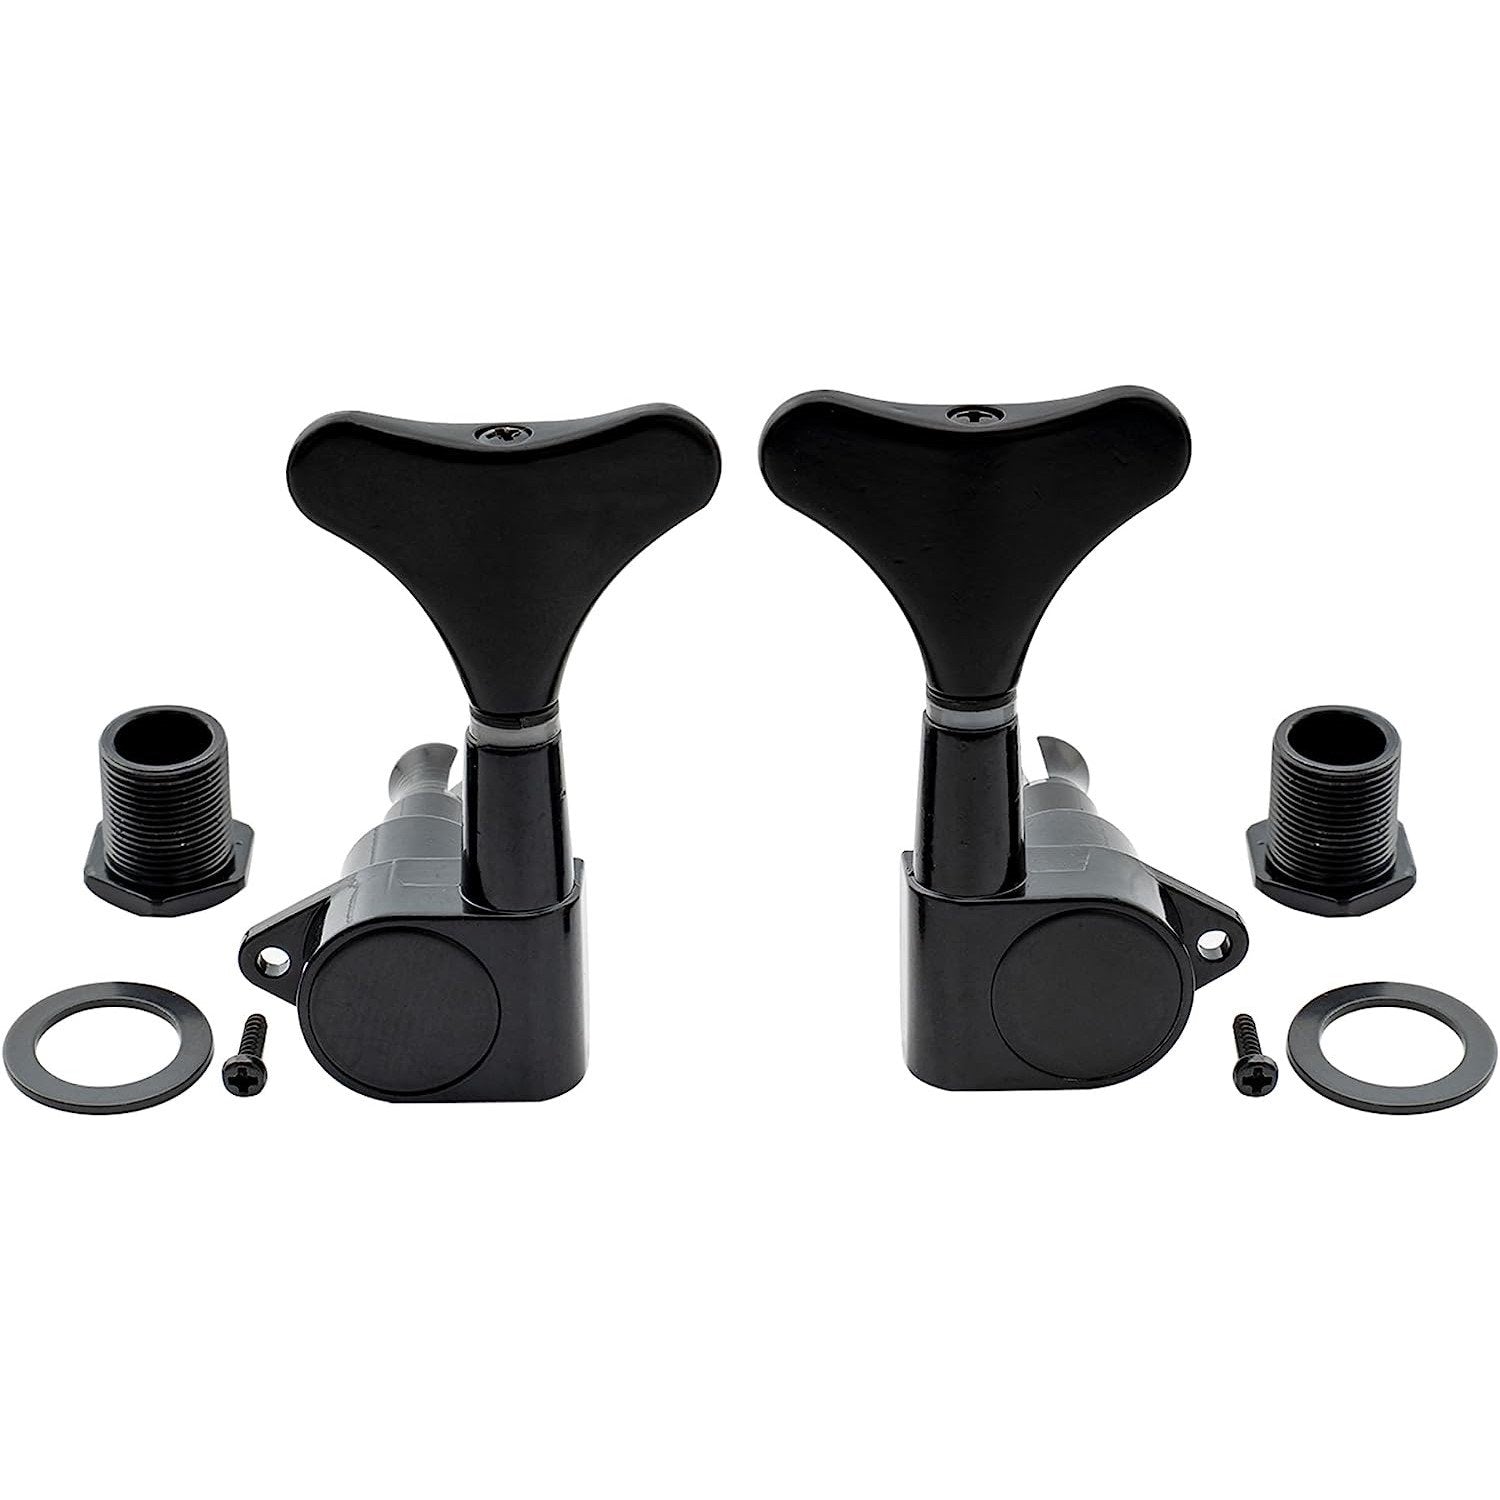 3x3 Sealed Bass Tuning Pegs, Black